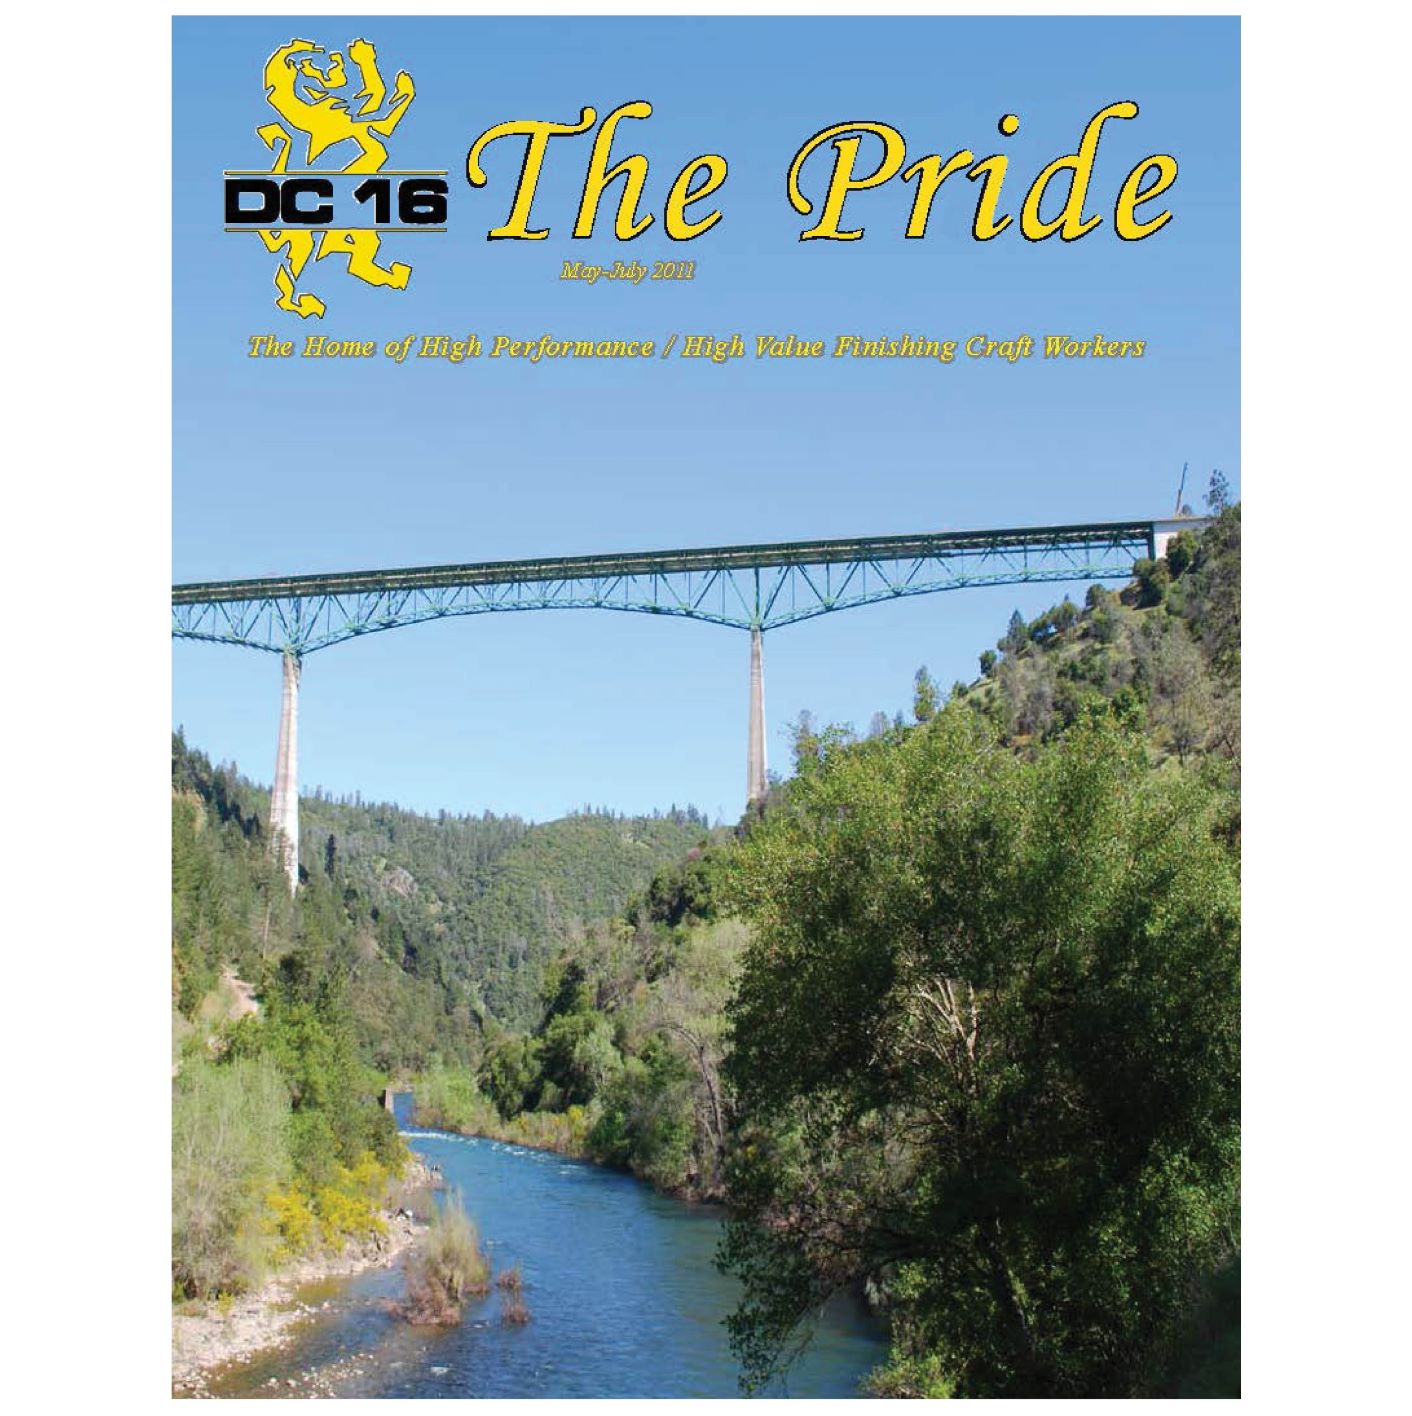 Image from the Gallery: The Pride May – July 2011